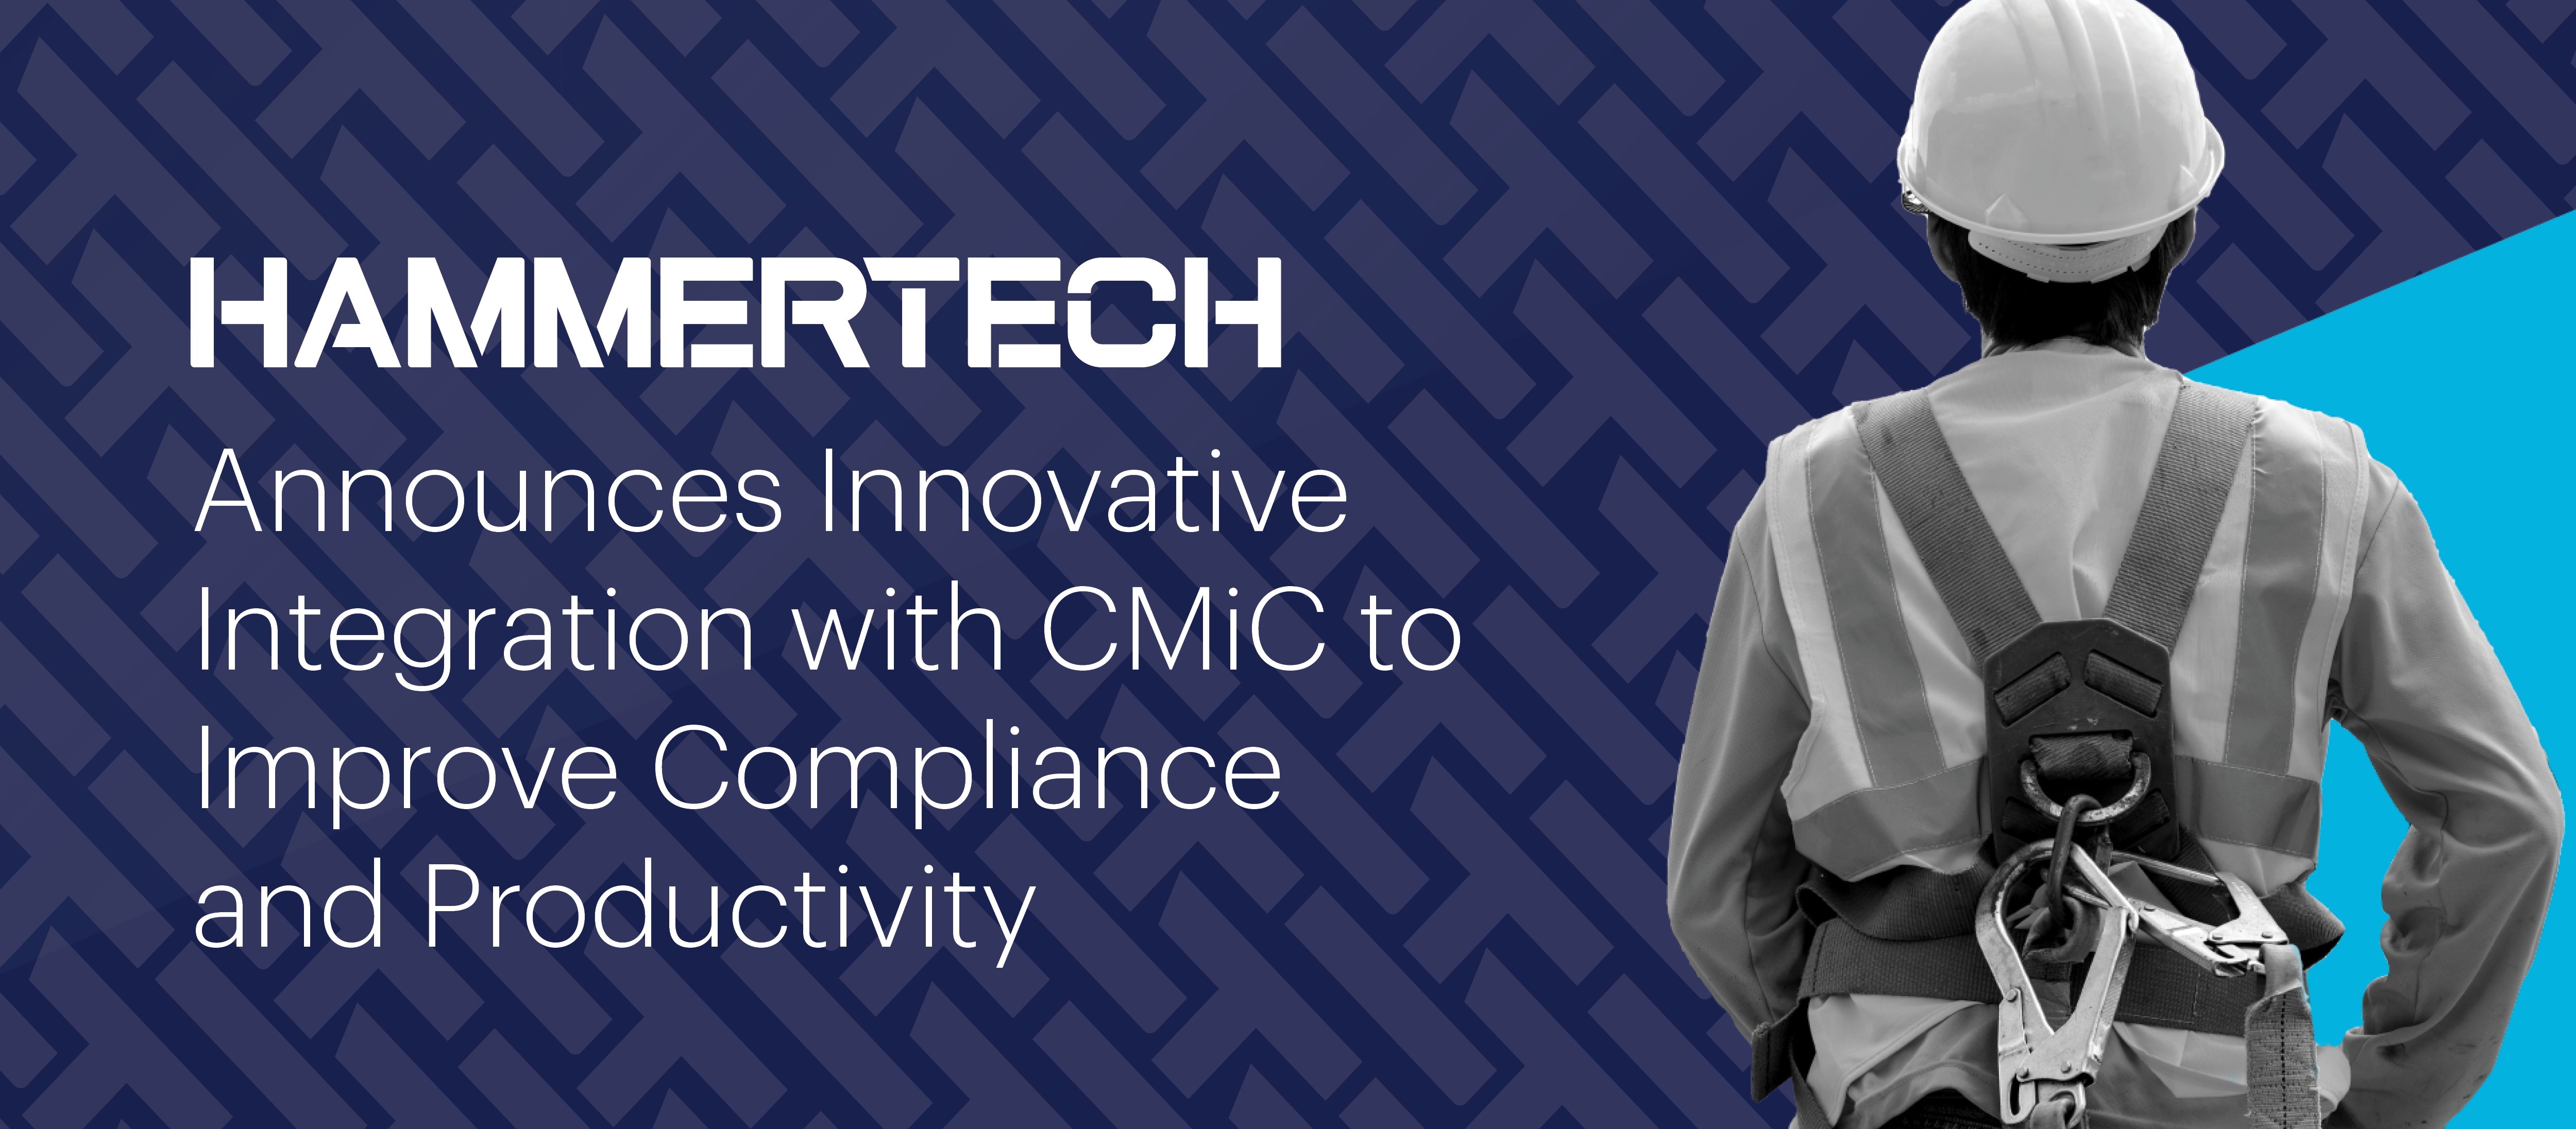 HammerTech Announces Innovative Integration with CMiC to Improve Compliance and Productivity